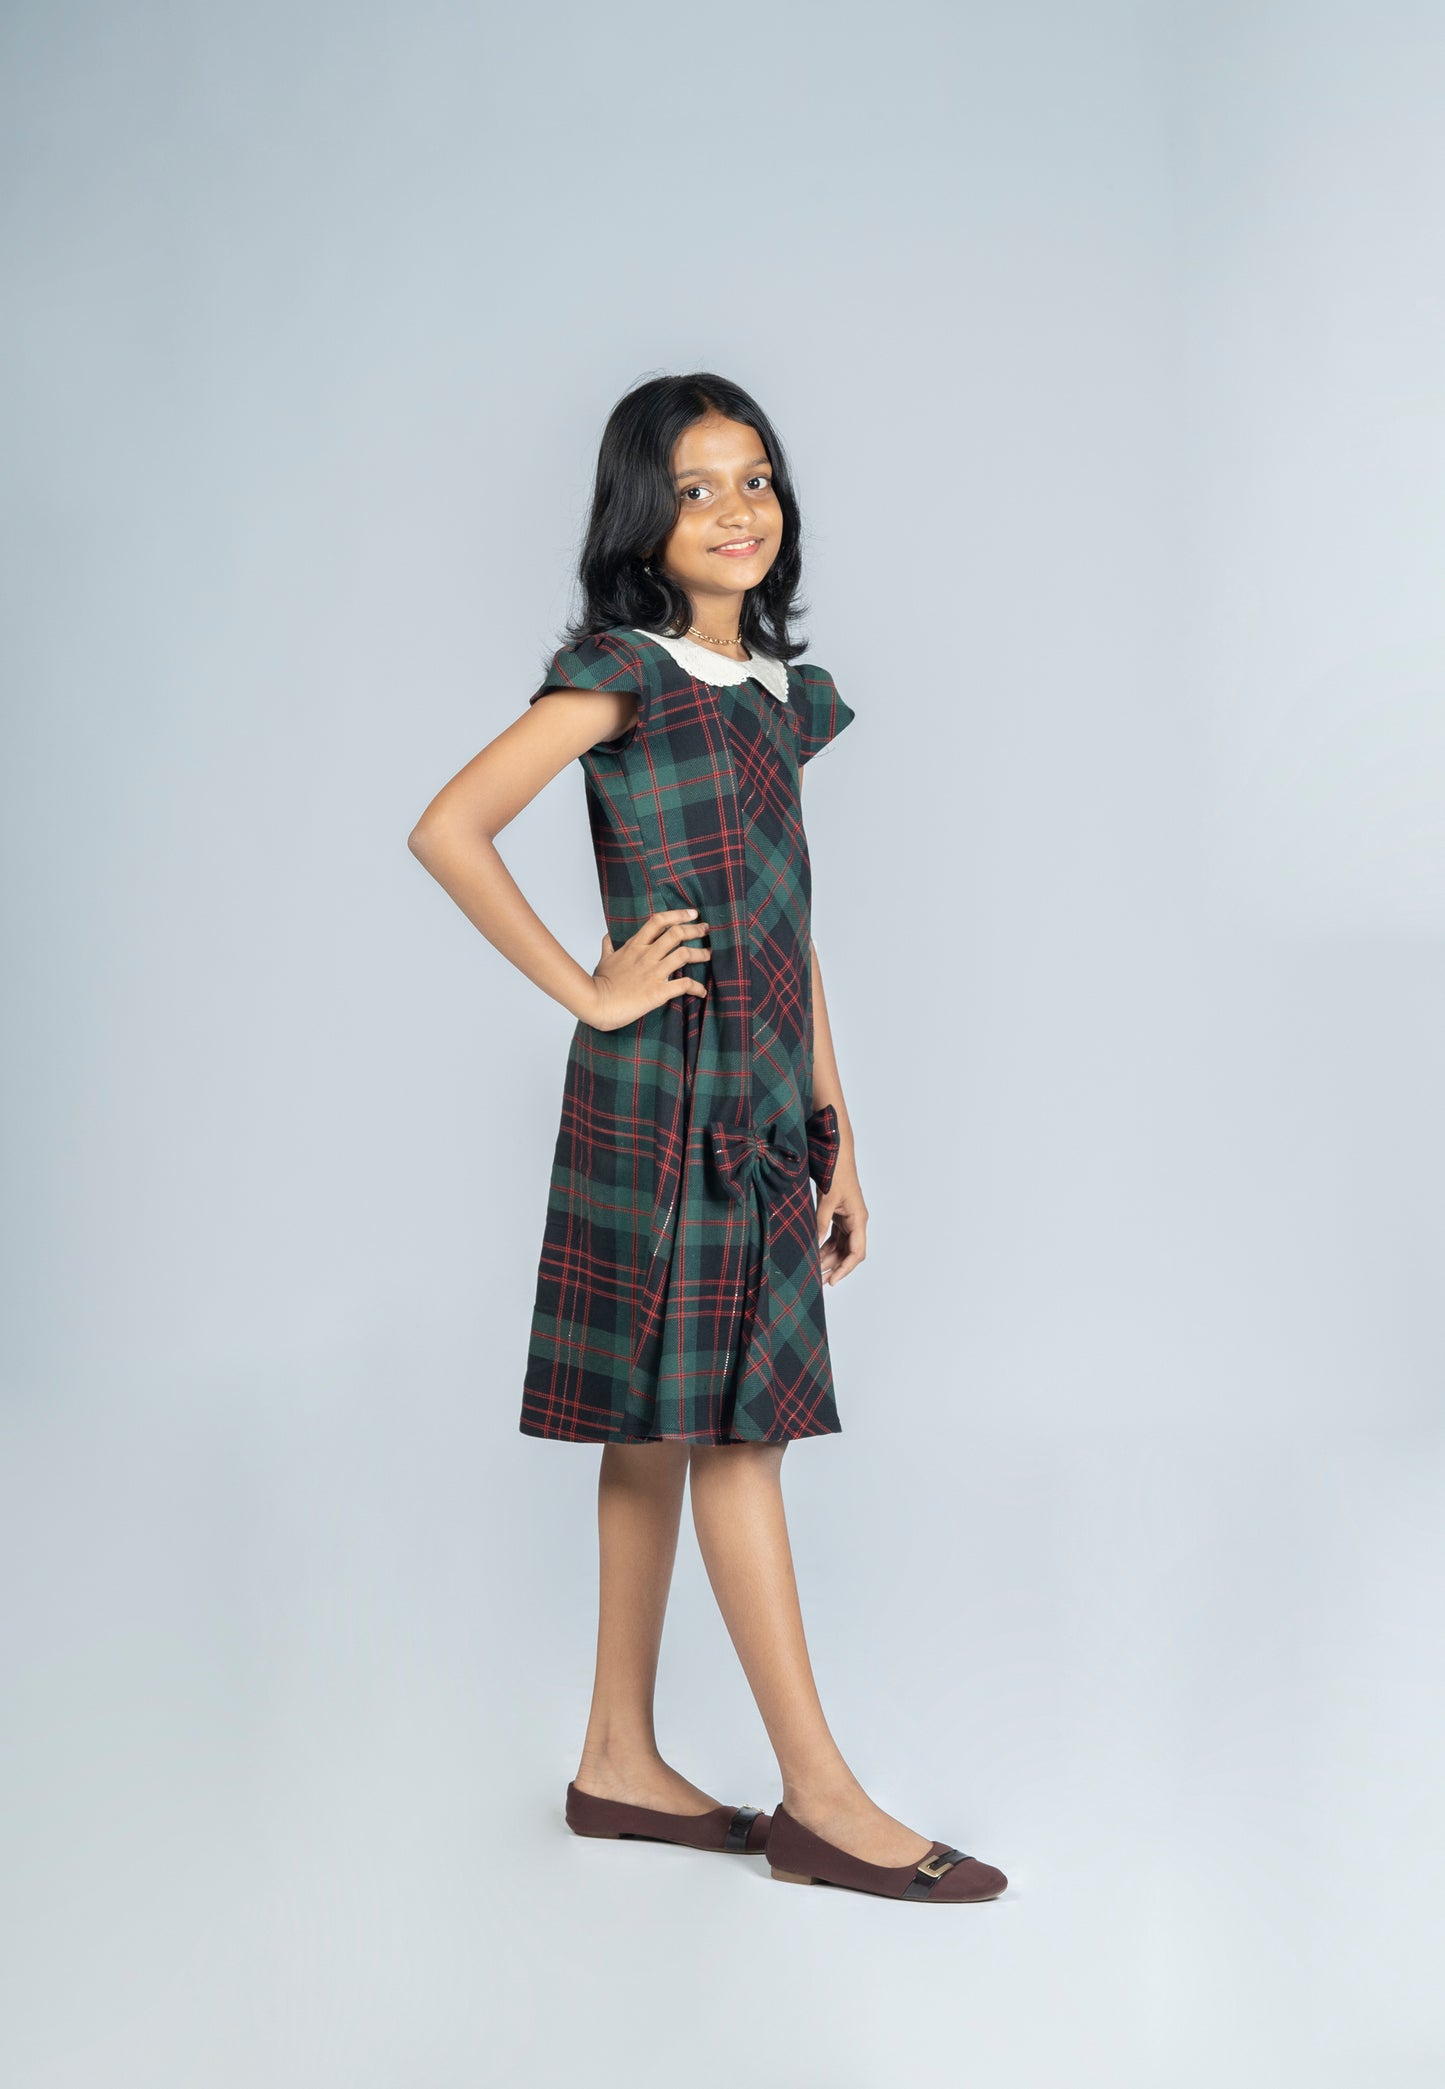 Red and green check frock with Peter Pan collar and box pleats MBS-R236